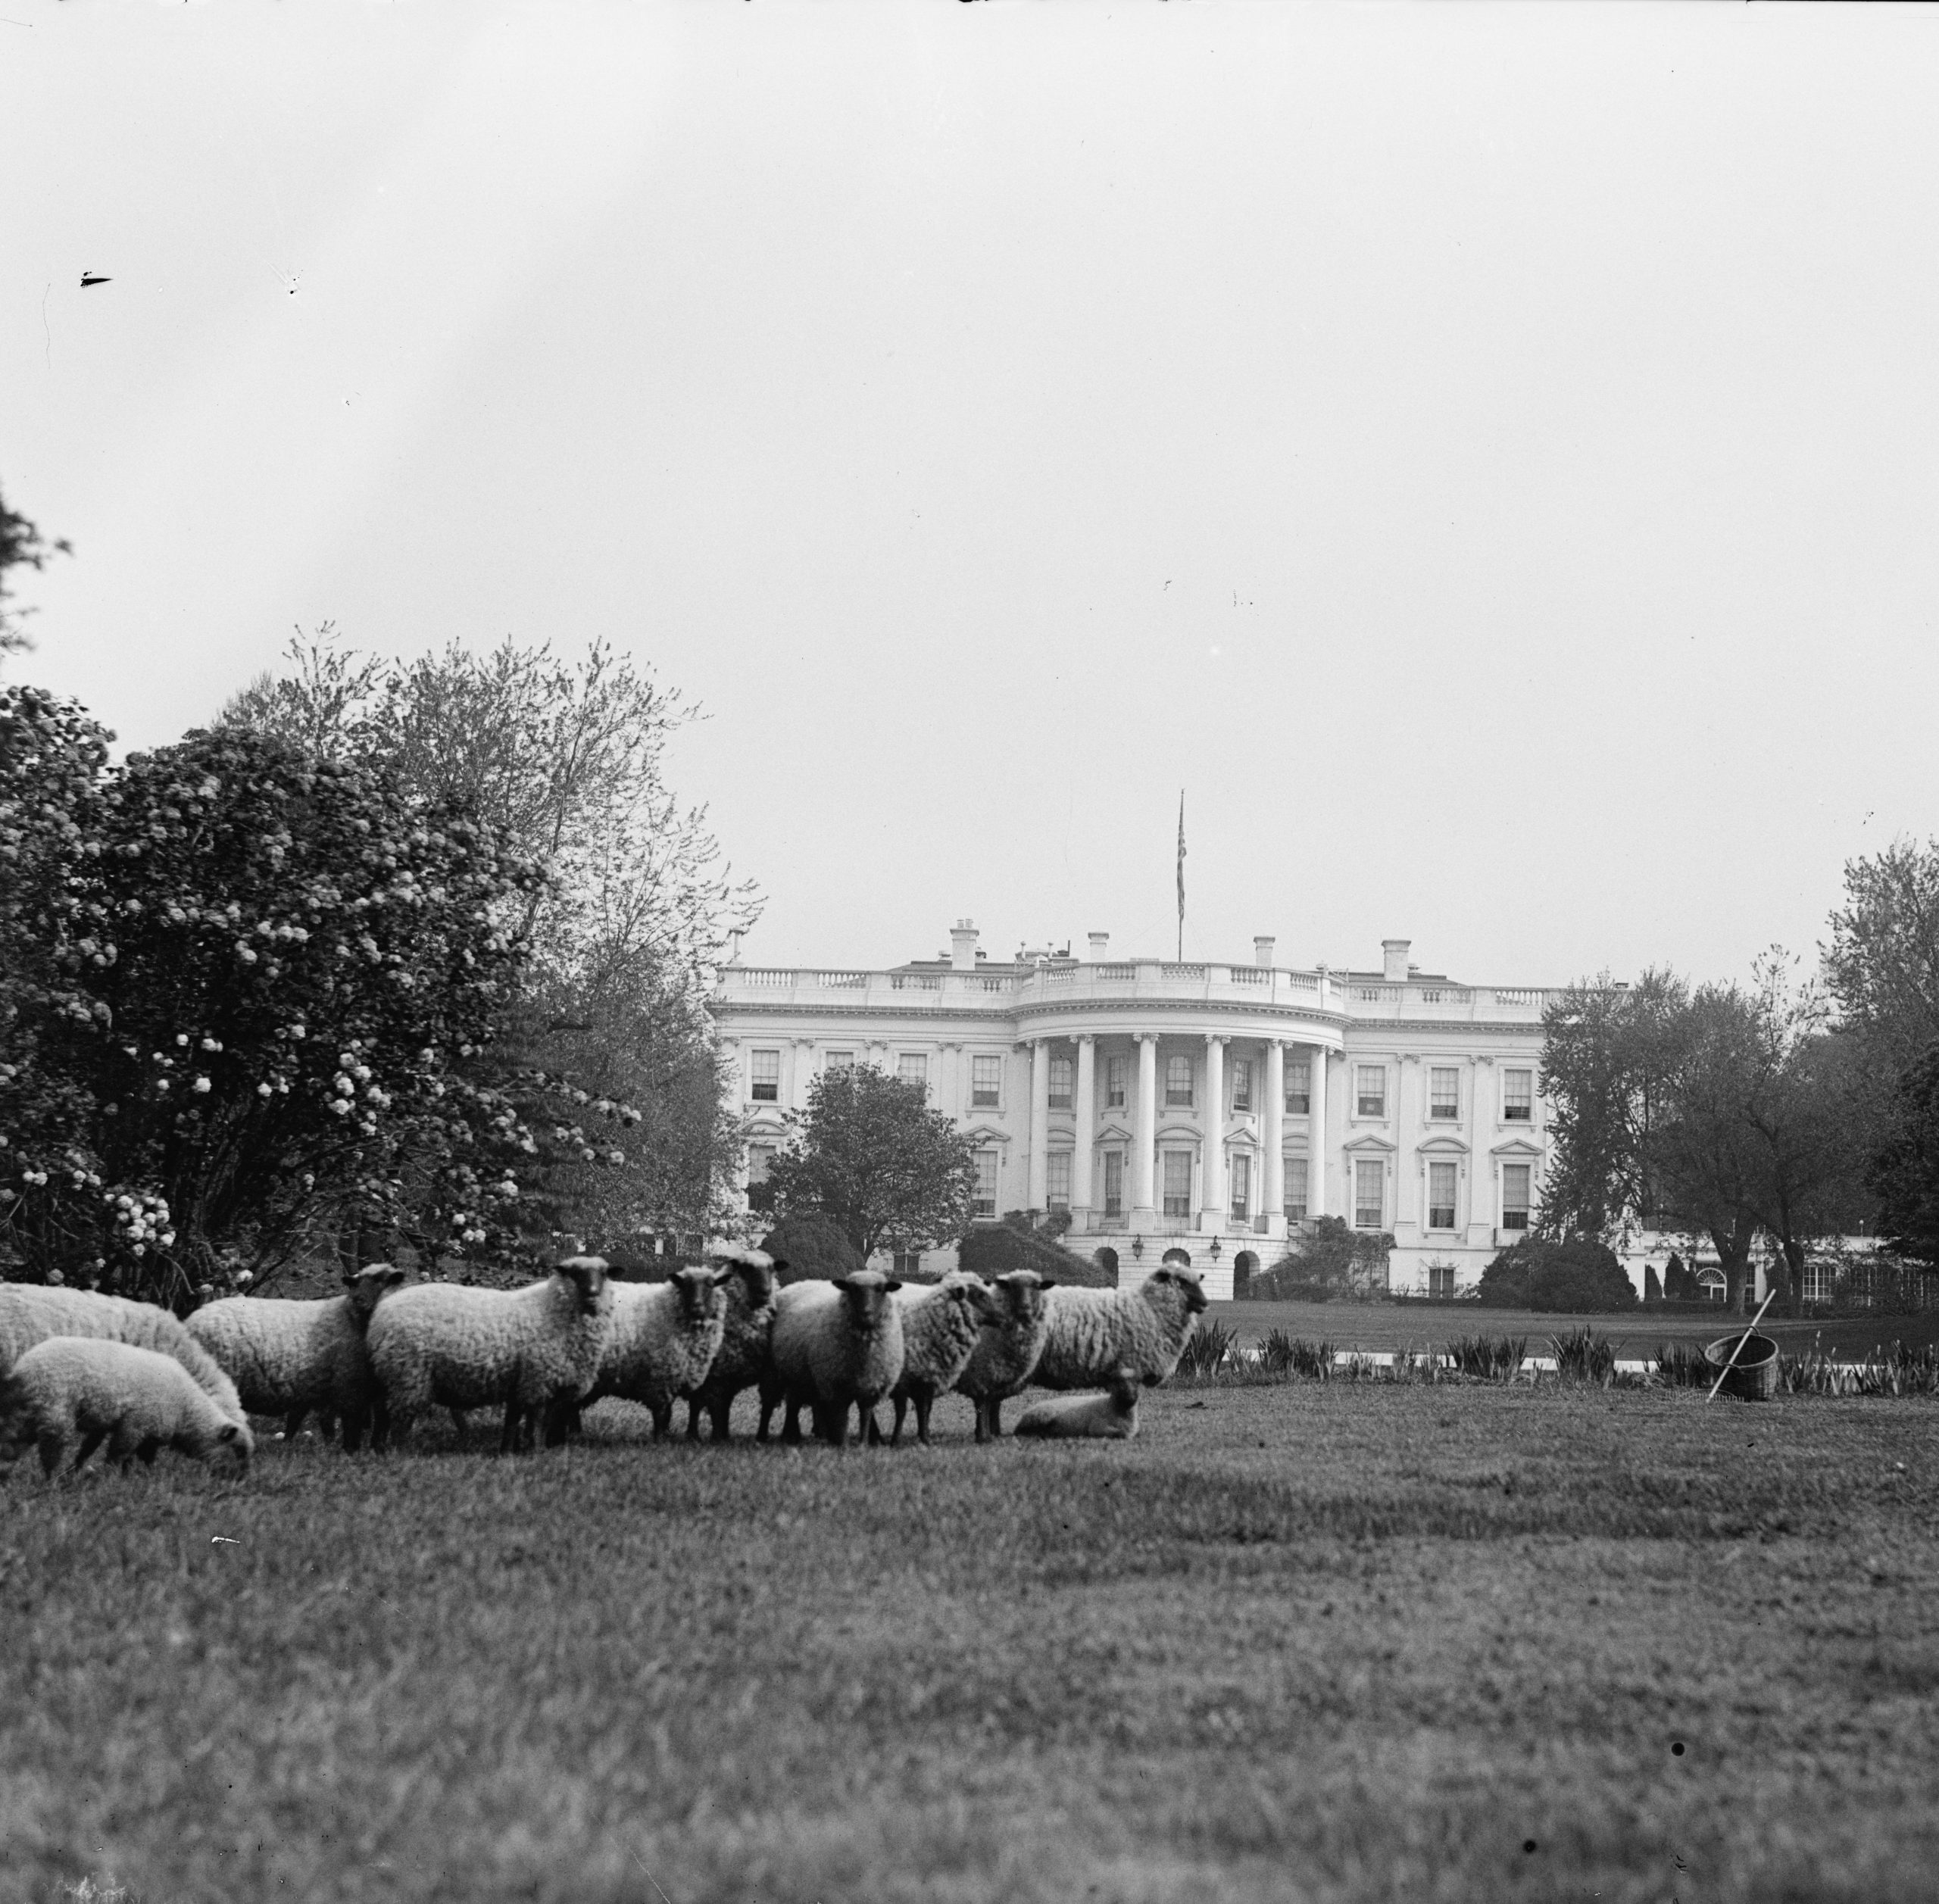 Sheep on lawn of White House